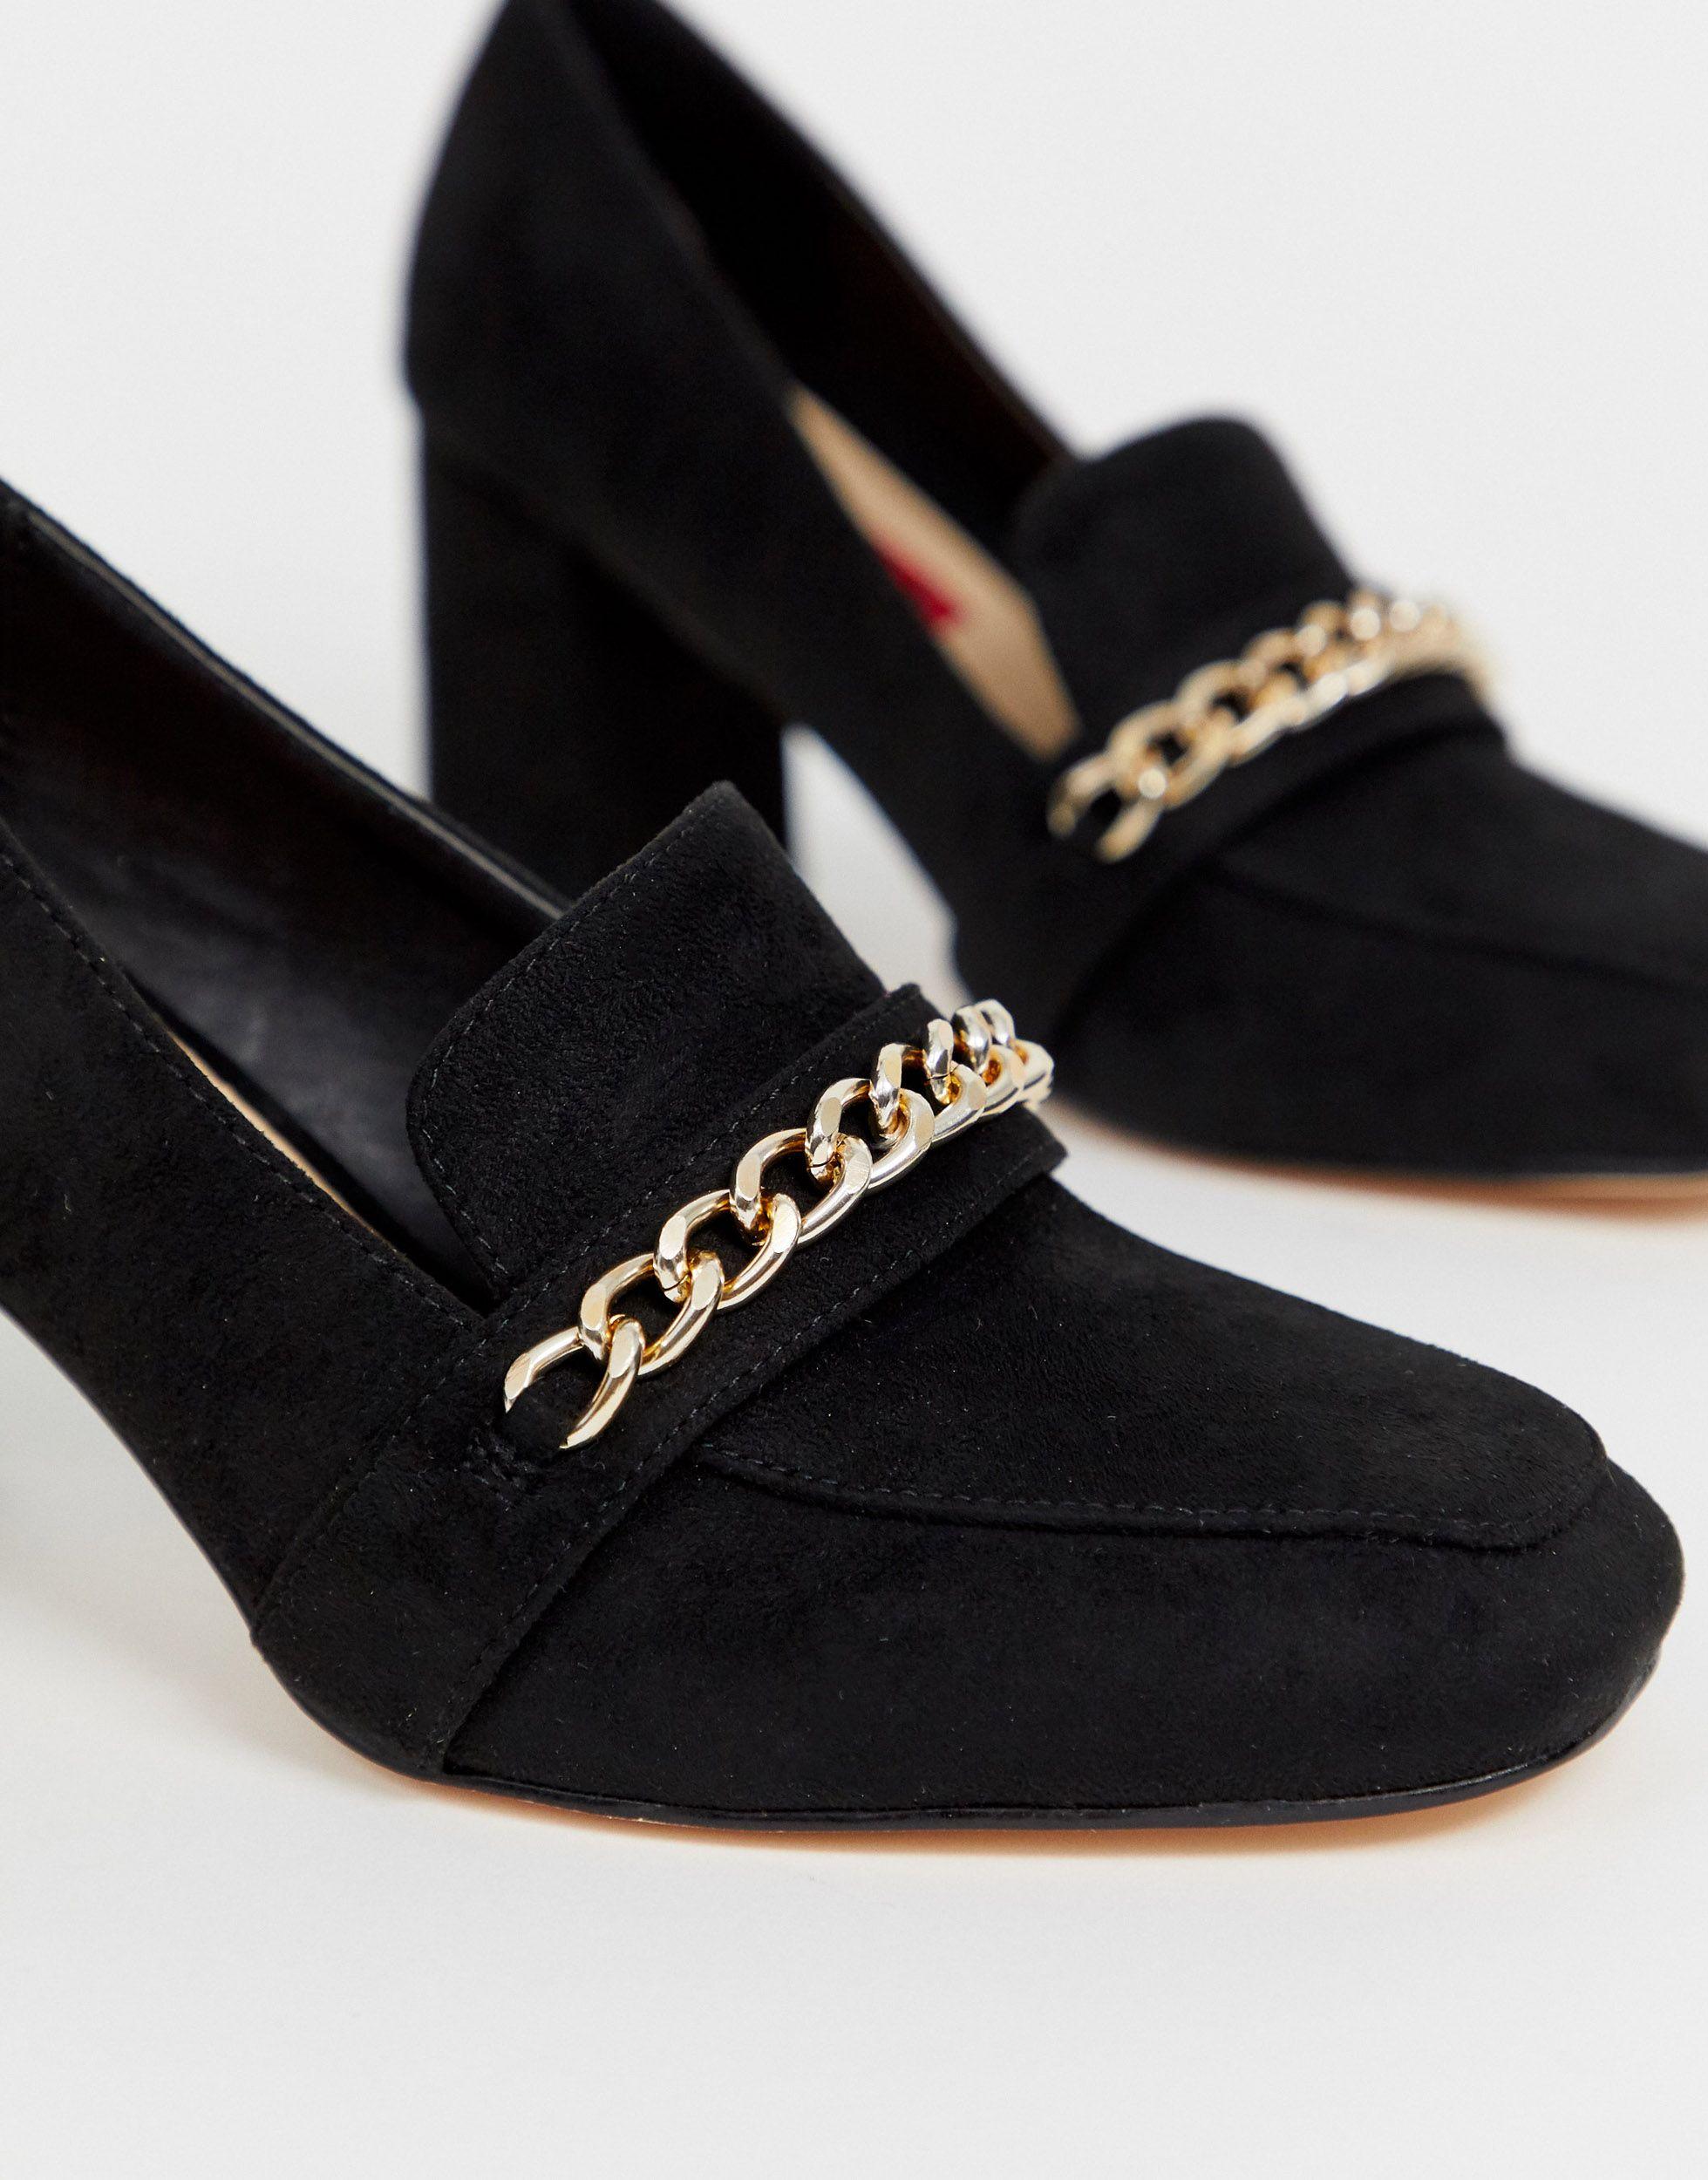 London Rebel Heeled Loafer Shoes With Gold Chain in Black | Lyst